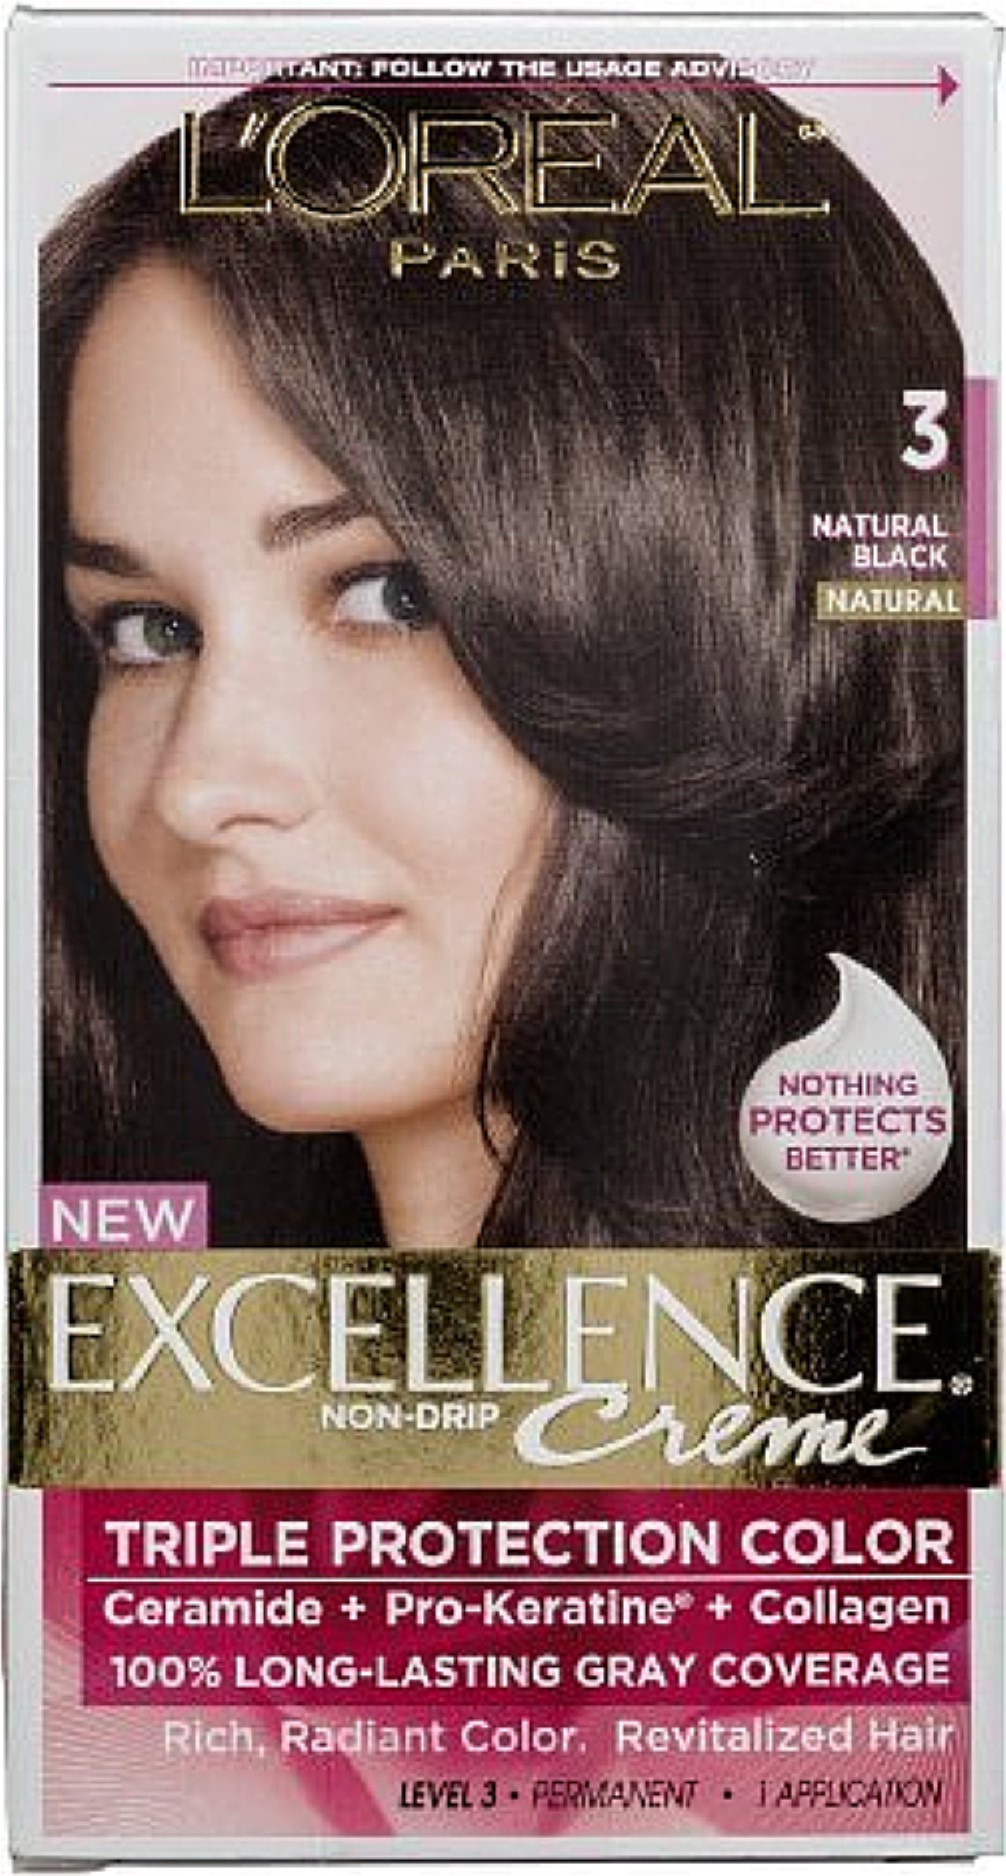 Loreal Natural Black Hair Dye - Excellence Creme Gray Hair Coverage